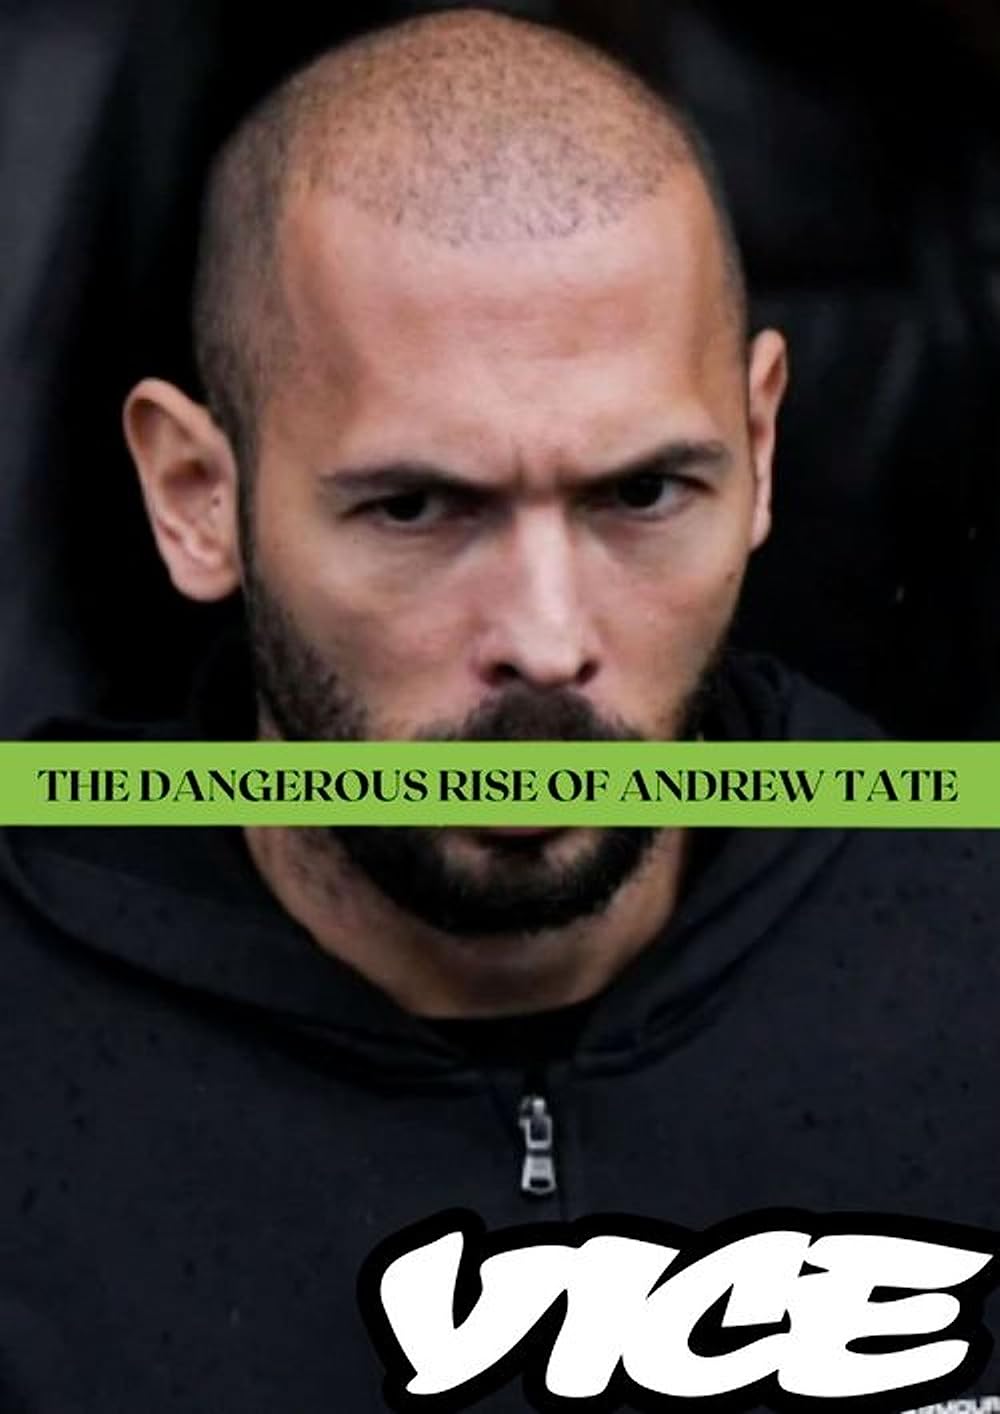 Vice Special Report: The Dangerous Rise of Andrew Tate